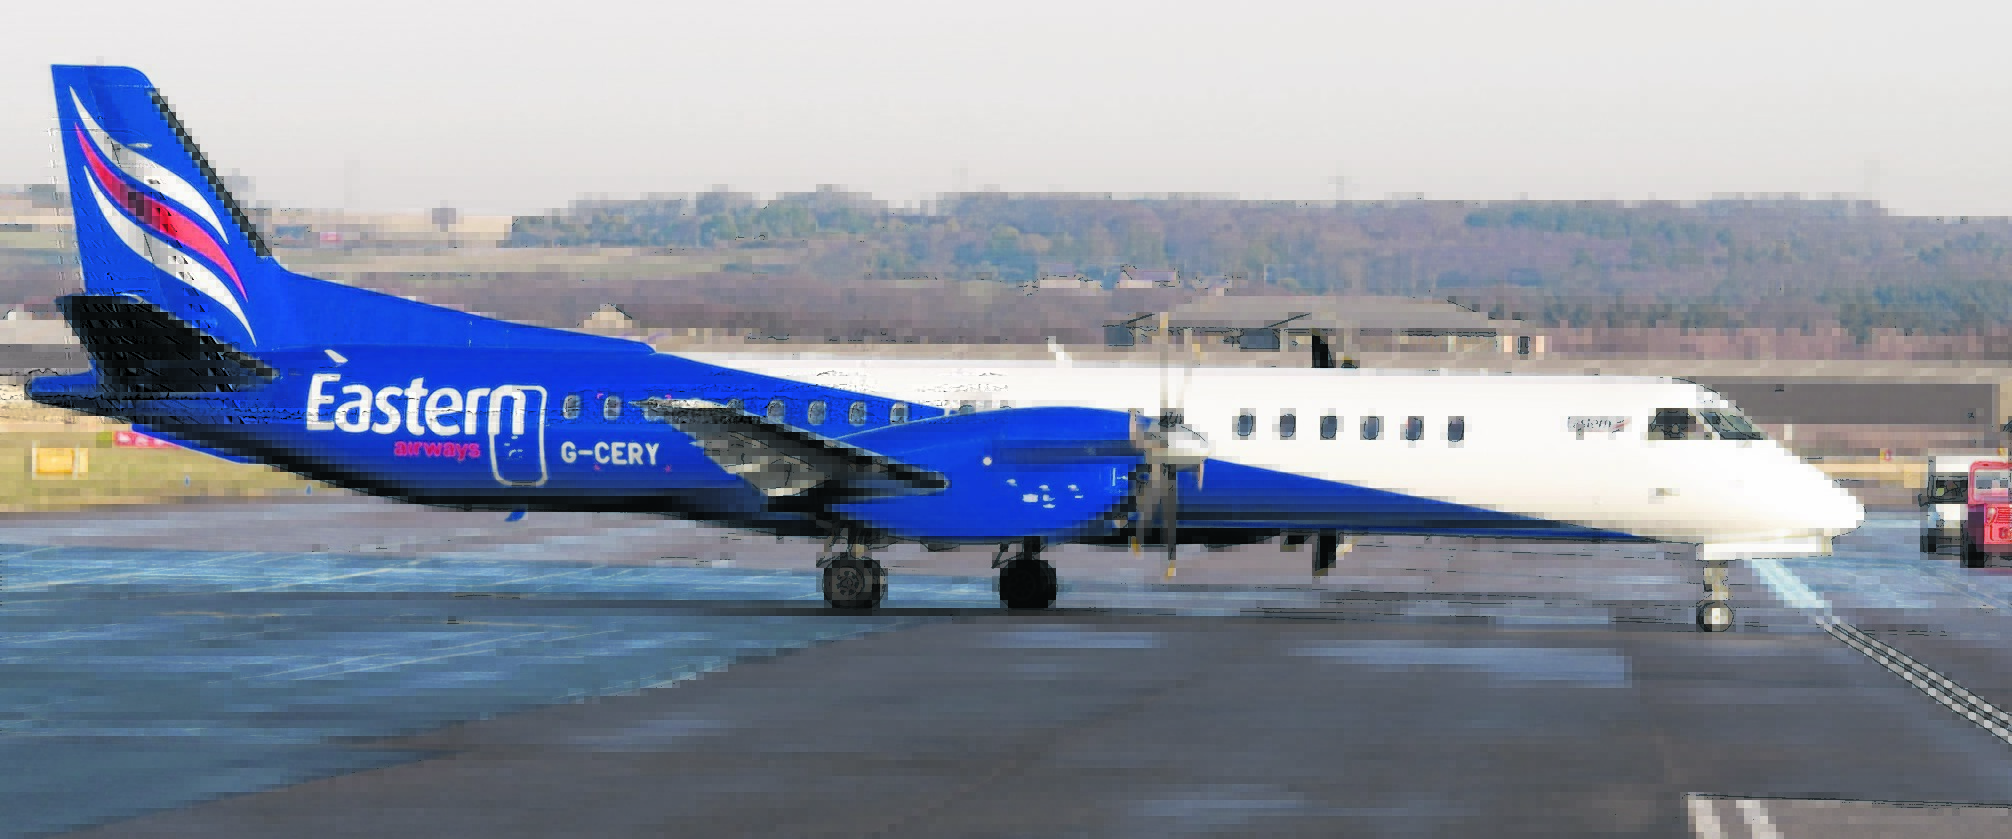 A Saab 2000 plans operated by Eastern Airways was involved in the incident.